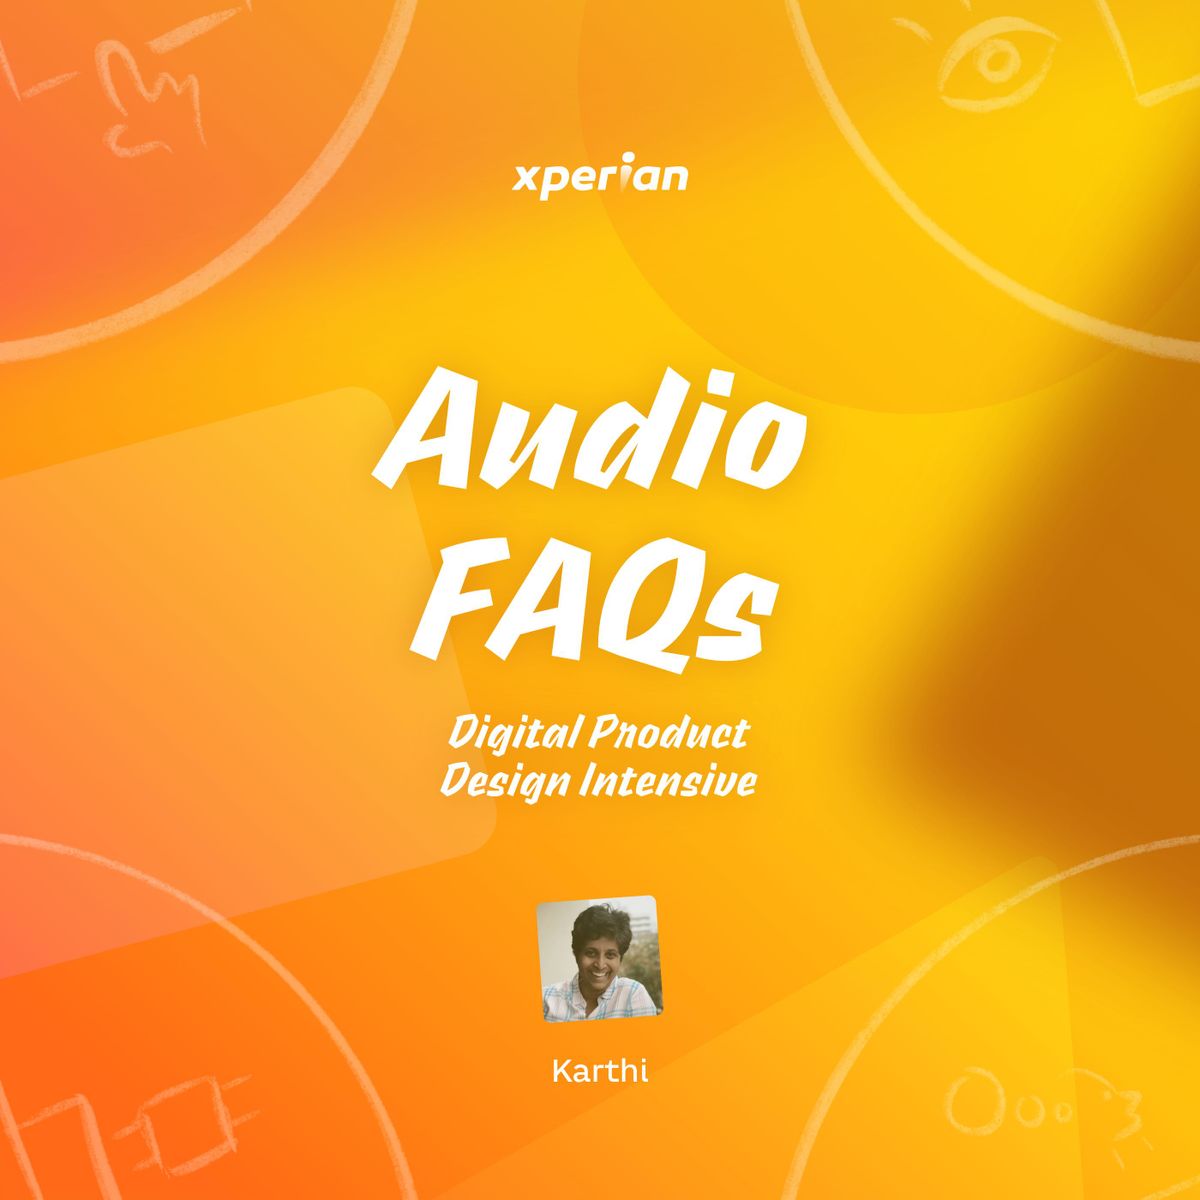 What if FAQs are better with Audio?